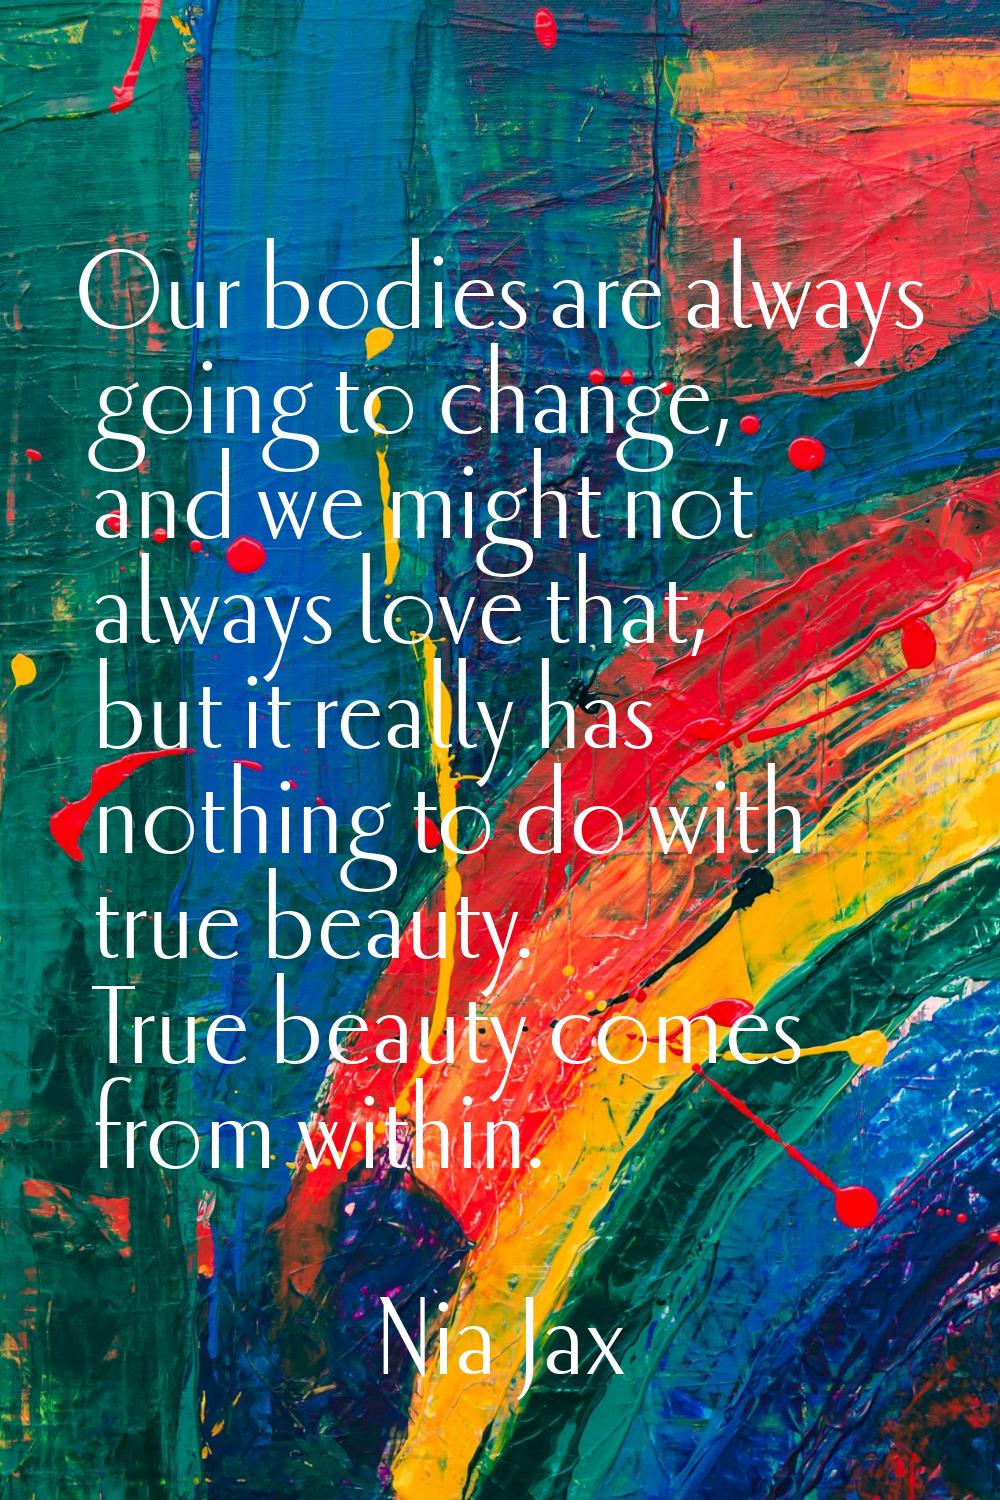 Our bodies are always going to change, and we might not always love that, but it really has nothing